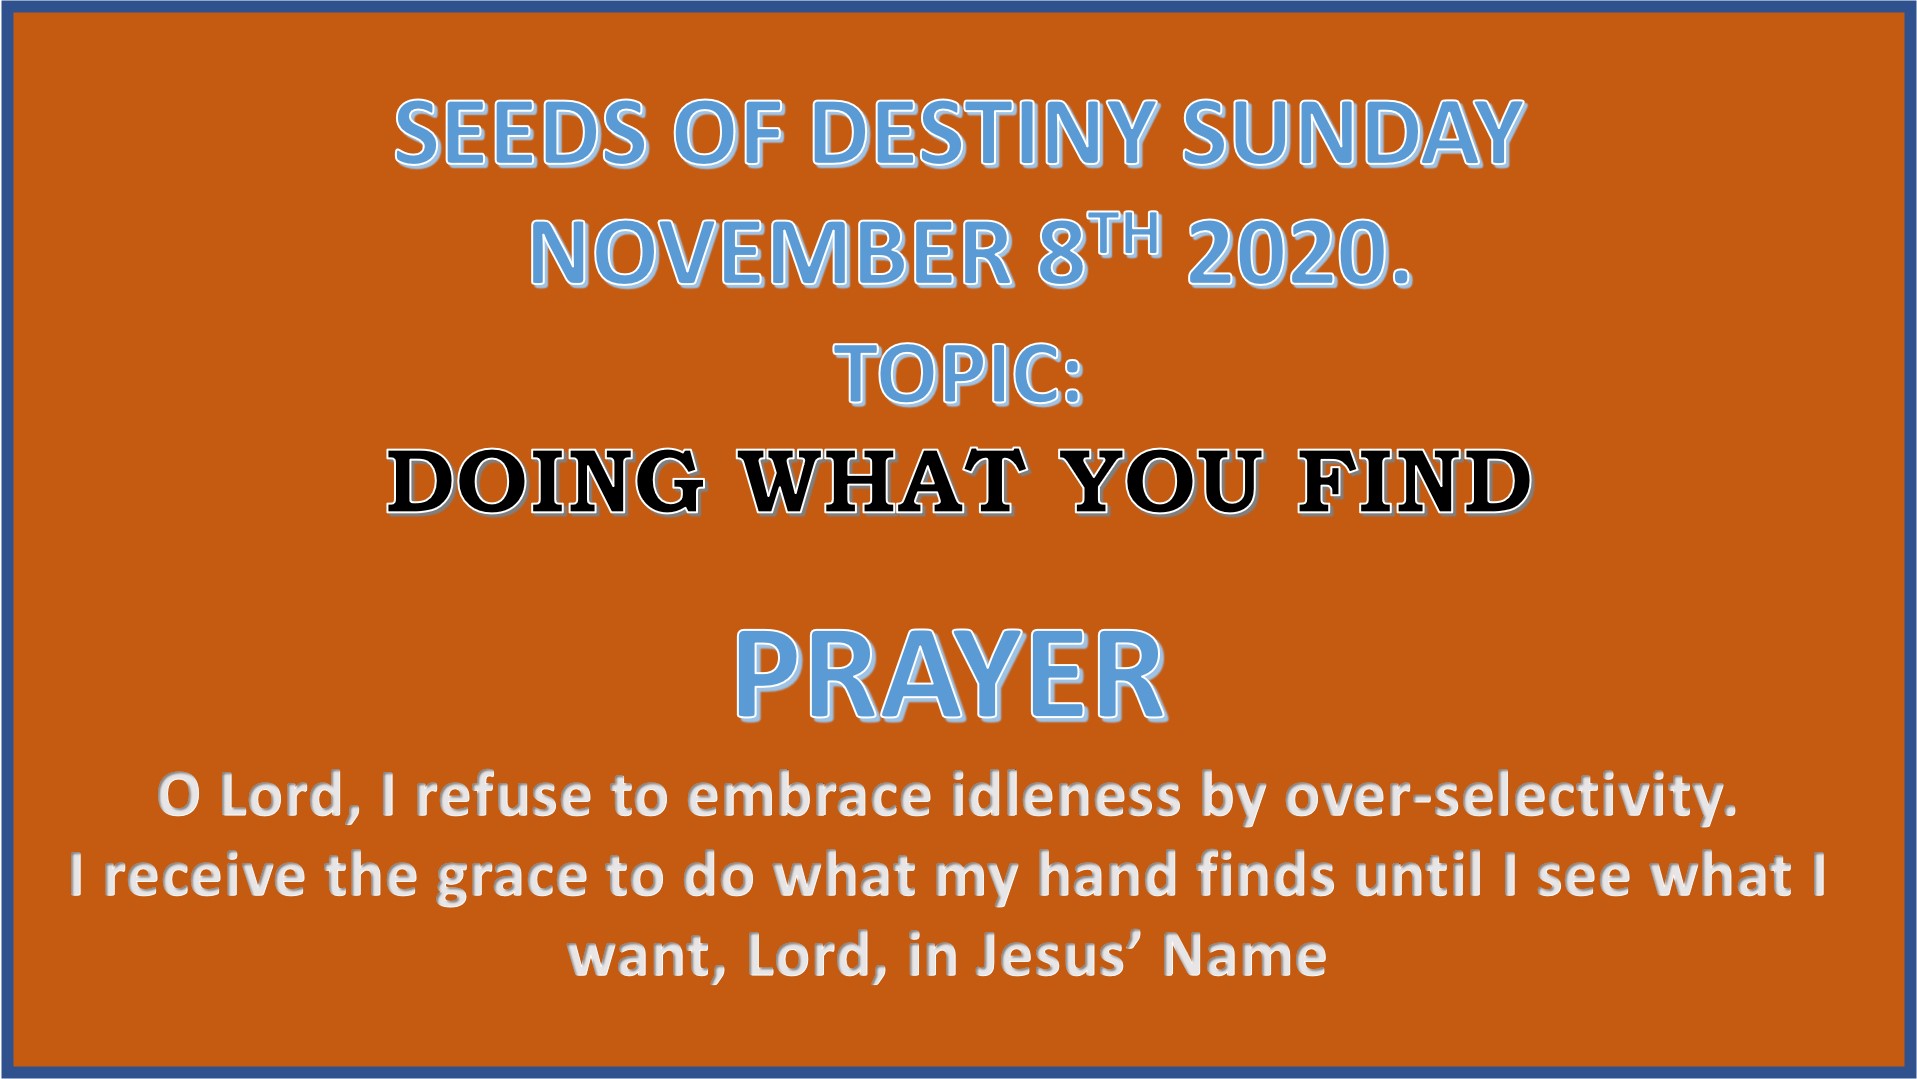 Seeds of Destiny Sunday 8th November 2020 by Dr Paul Enenche